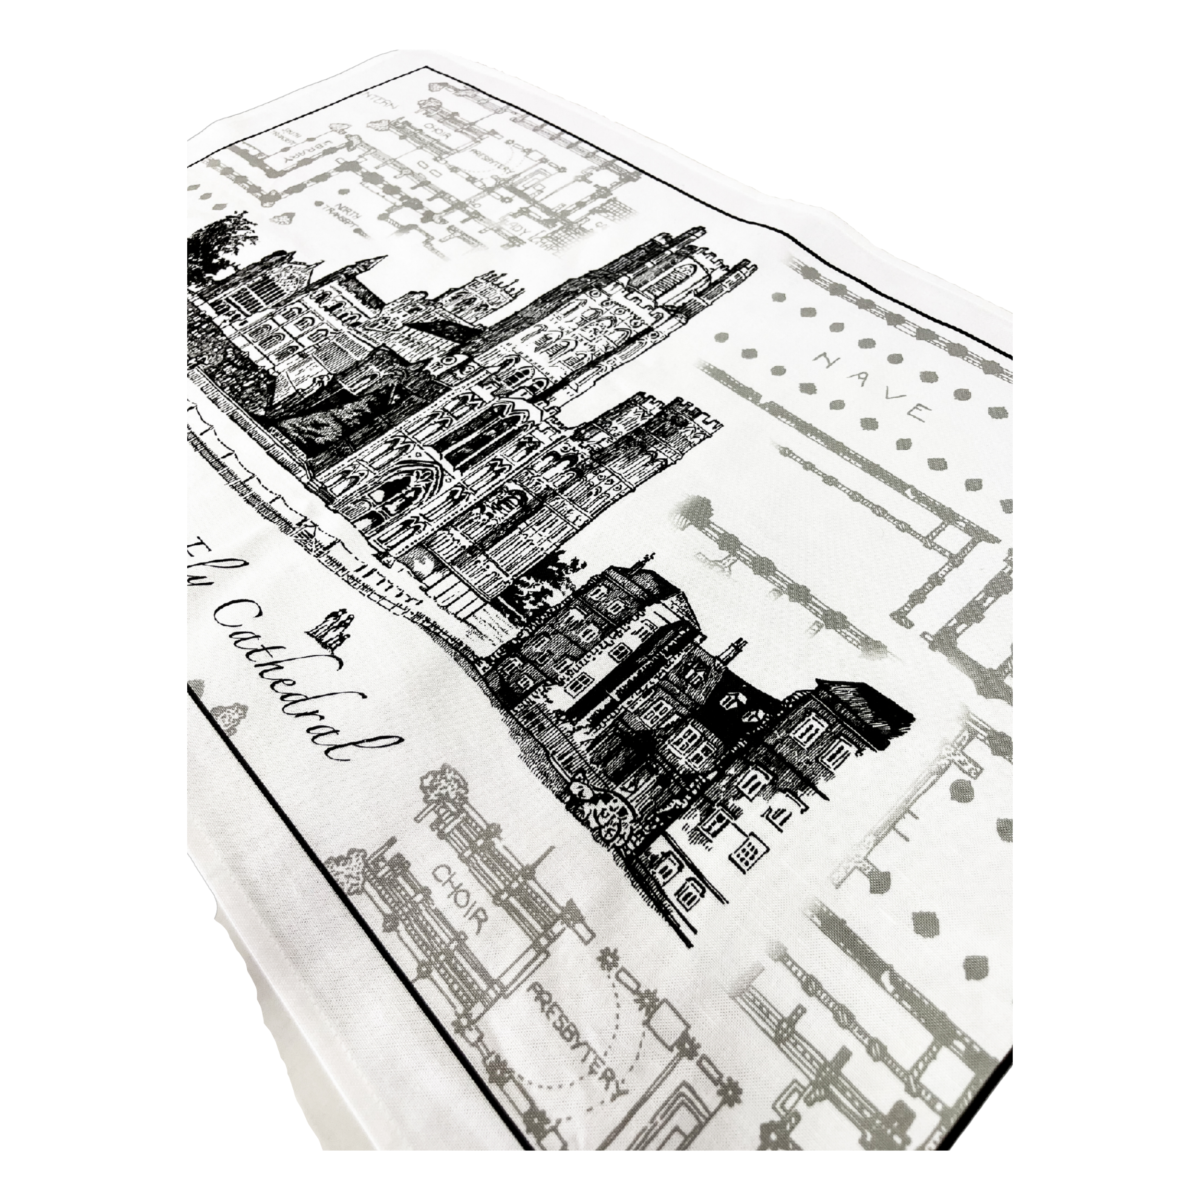 Image of Ely Cathedral Tea Towel